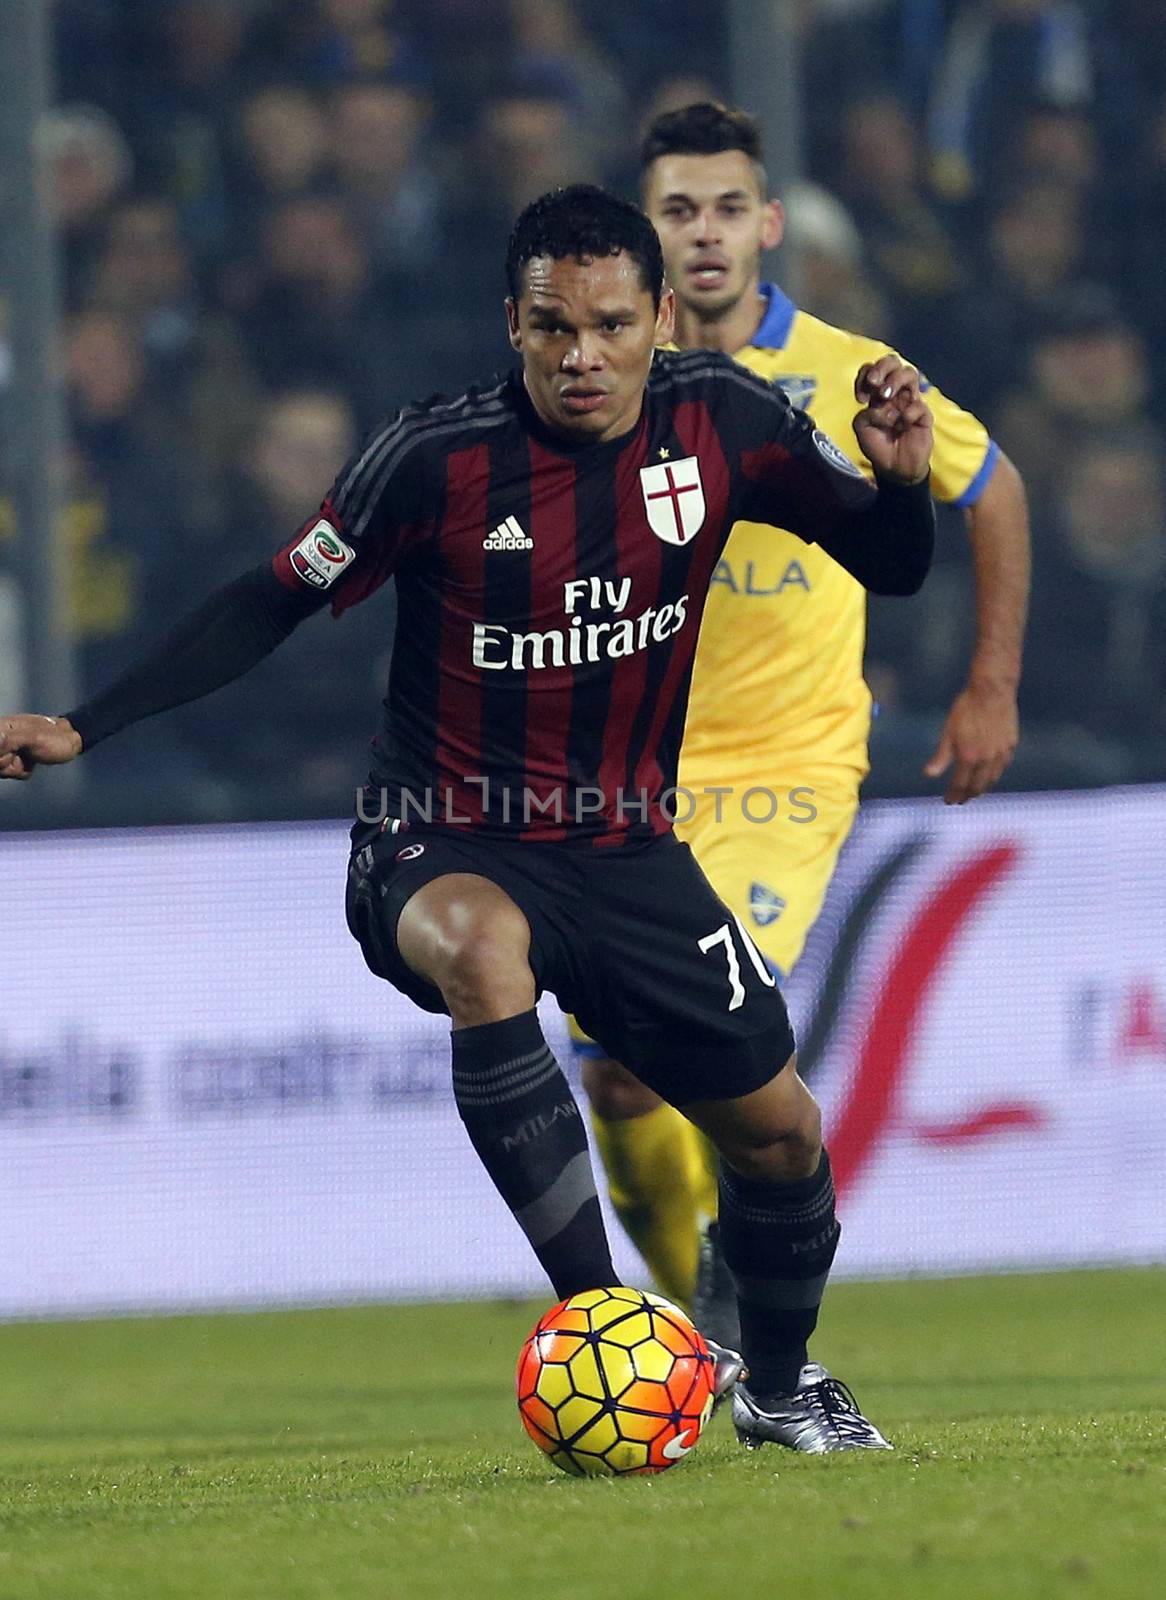 ITALY, Frosinone: Milan's Carlos Bacca controls the ball during the Italian Serie A match in which AC Milan would defeat Frosinone by a score of 4-2 at Matusa Stadium in Frosinone, Italy on December 20, 2015.